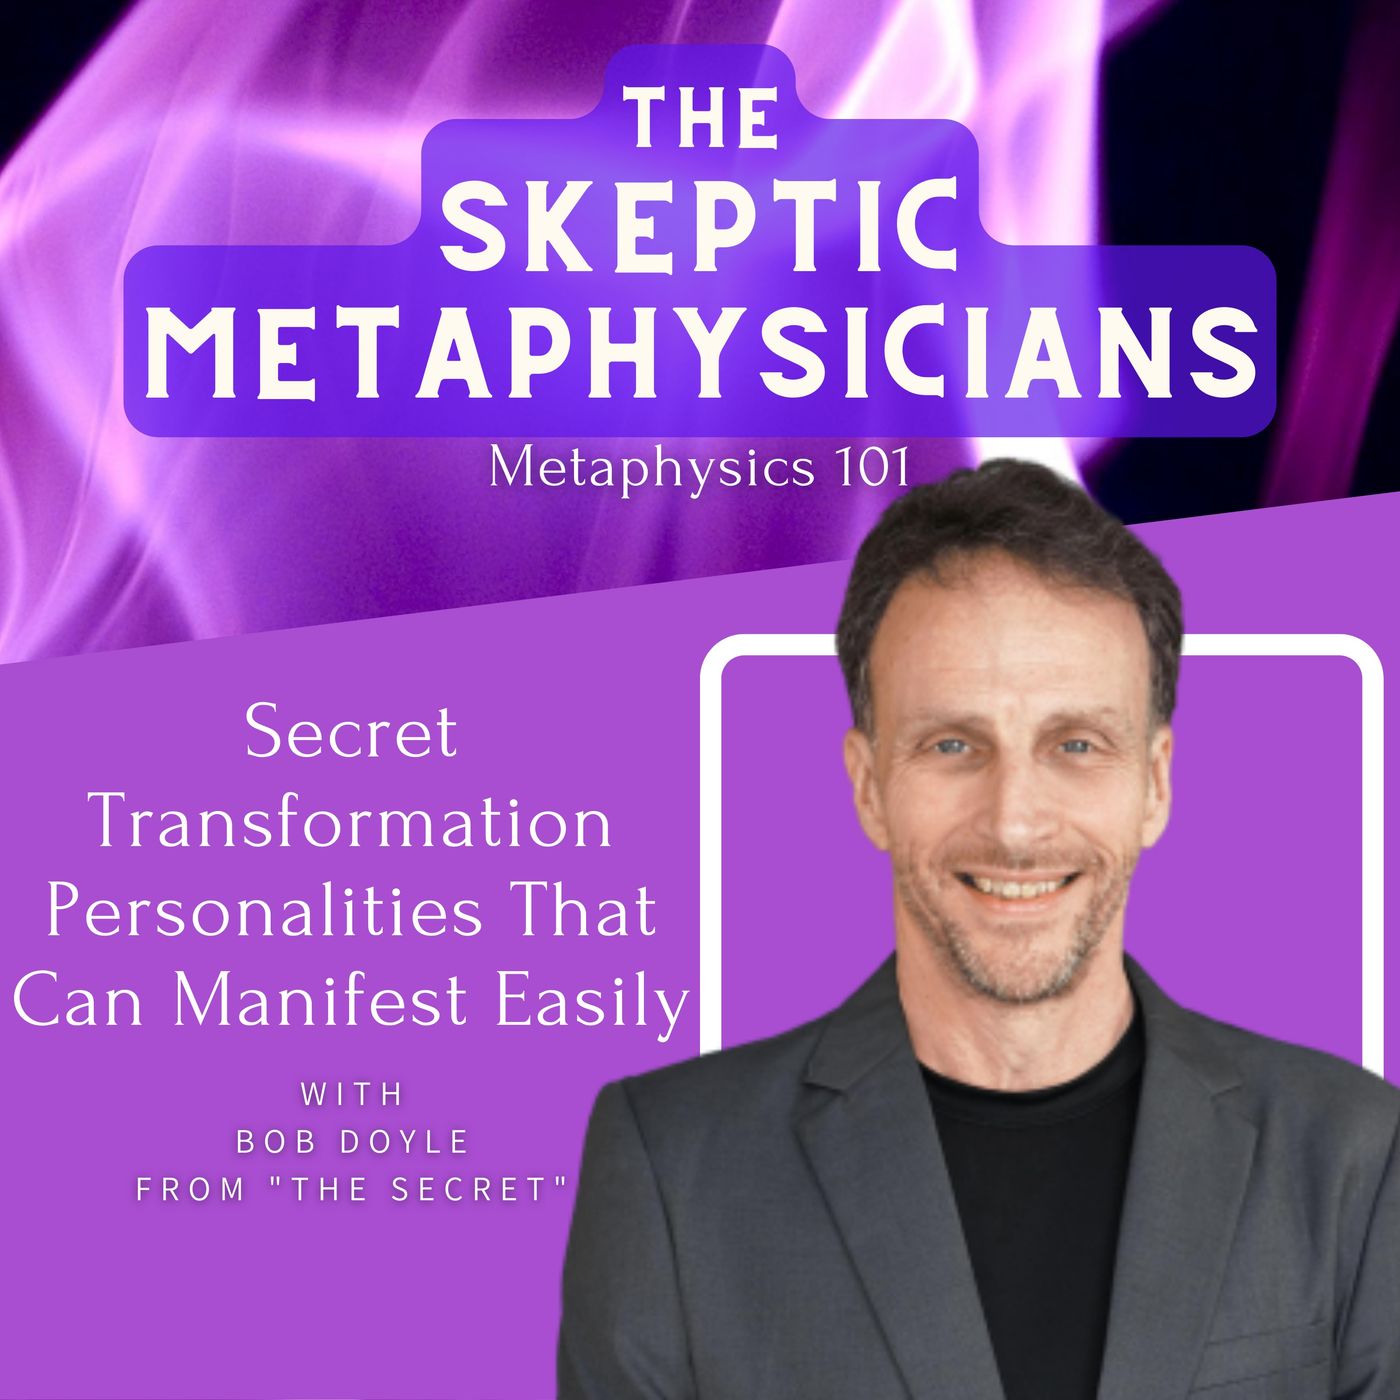 Secret Transformation Personalities That Can Manifest Easily | Bob Doyle Image